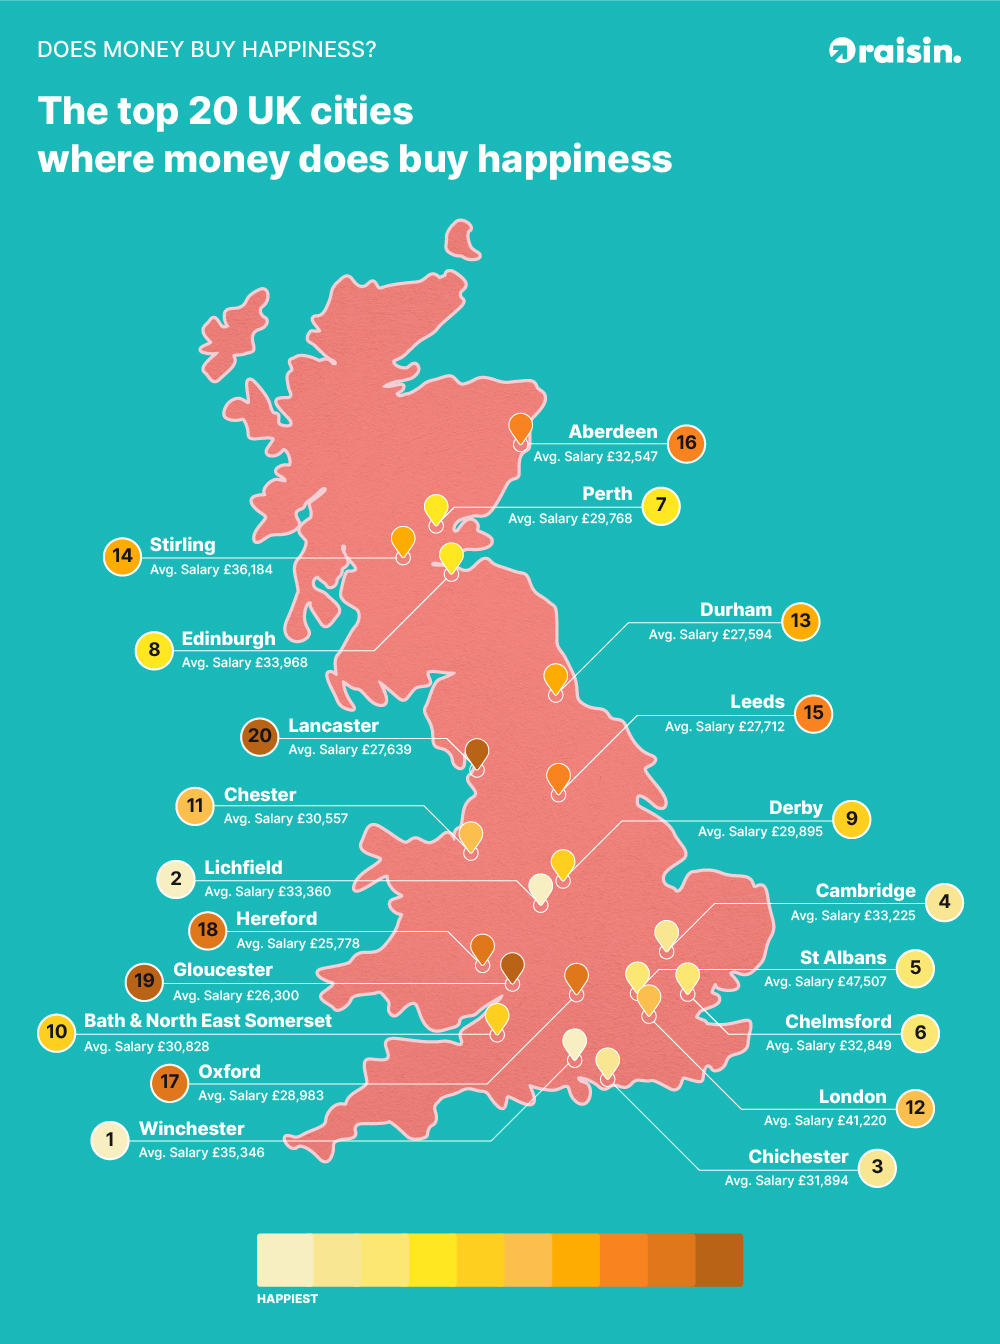 Where does money buy happiness in the UK?